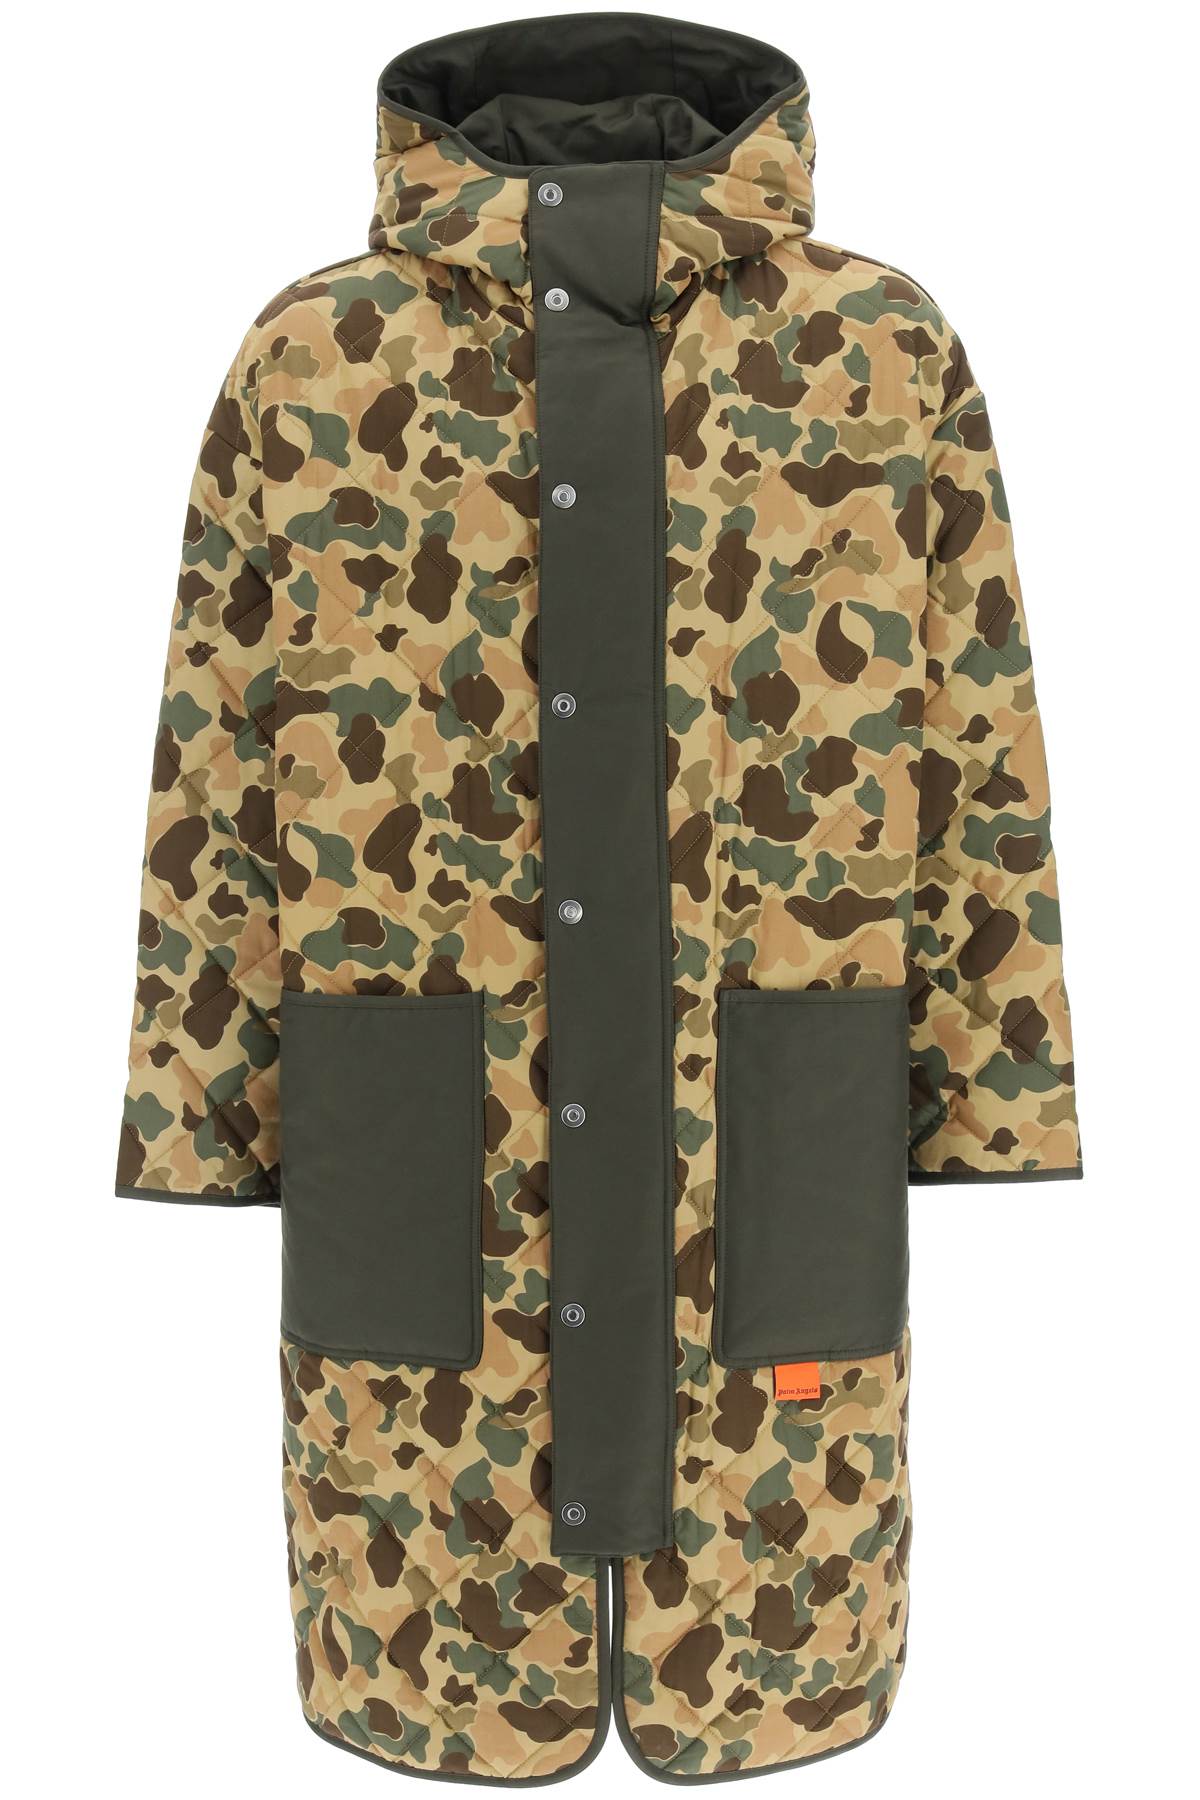 Palm Angels Long Camouflage Parka